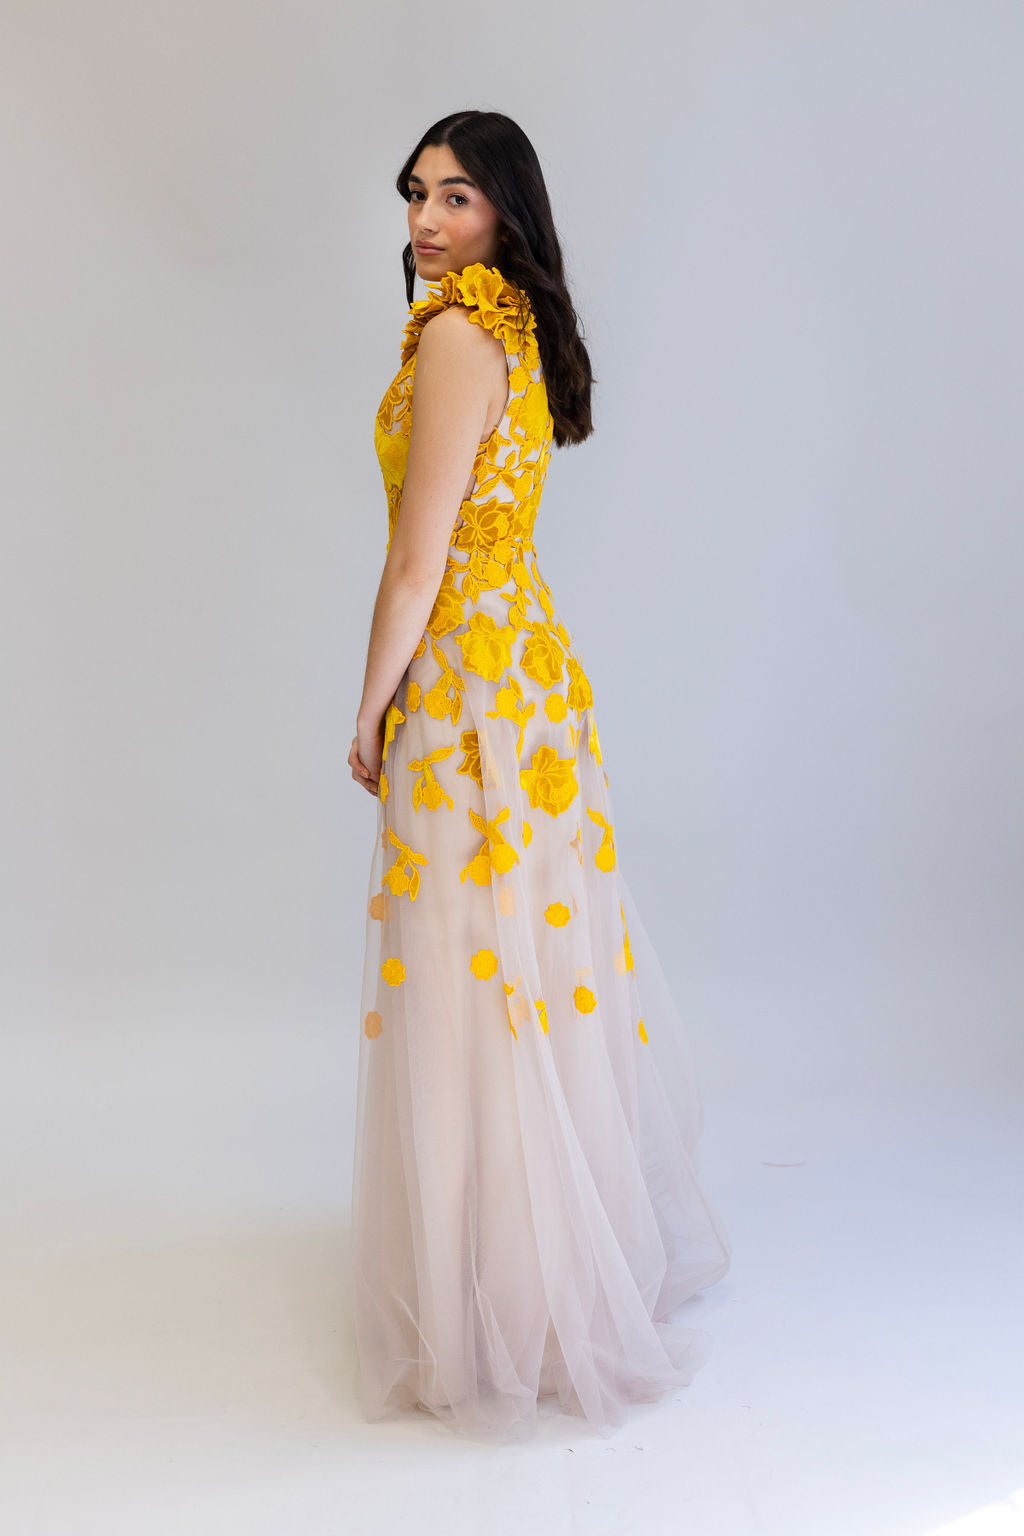 NUDE BASE BALLGOWN WITH HANDMADE GUPIURE LACE IN SUN YELLOW